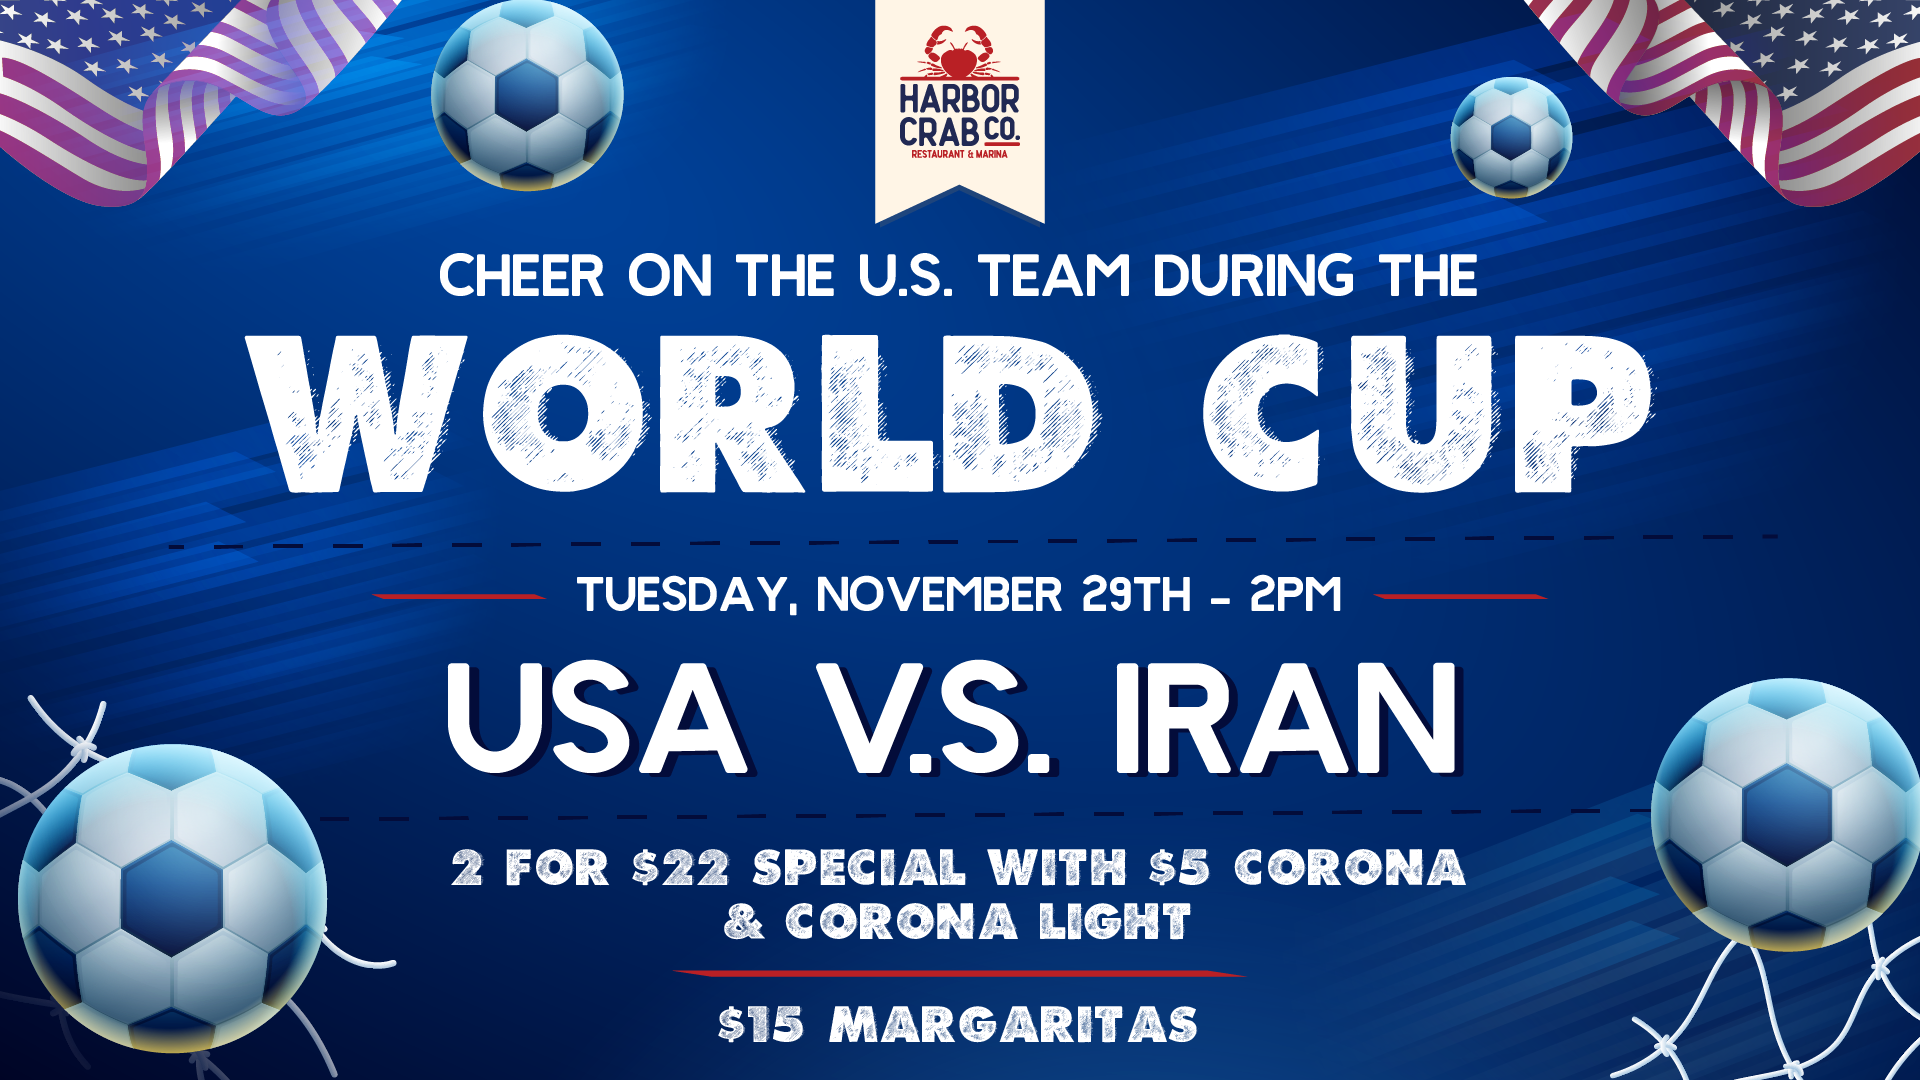 Cover for World Cup game on Tuesday, November 29th at 2pm